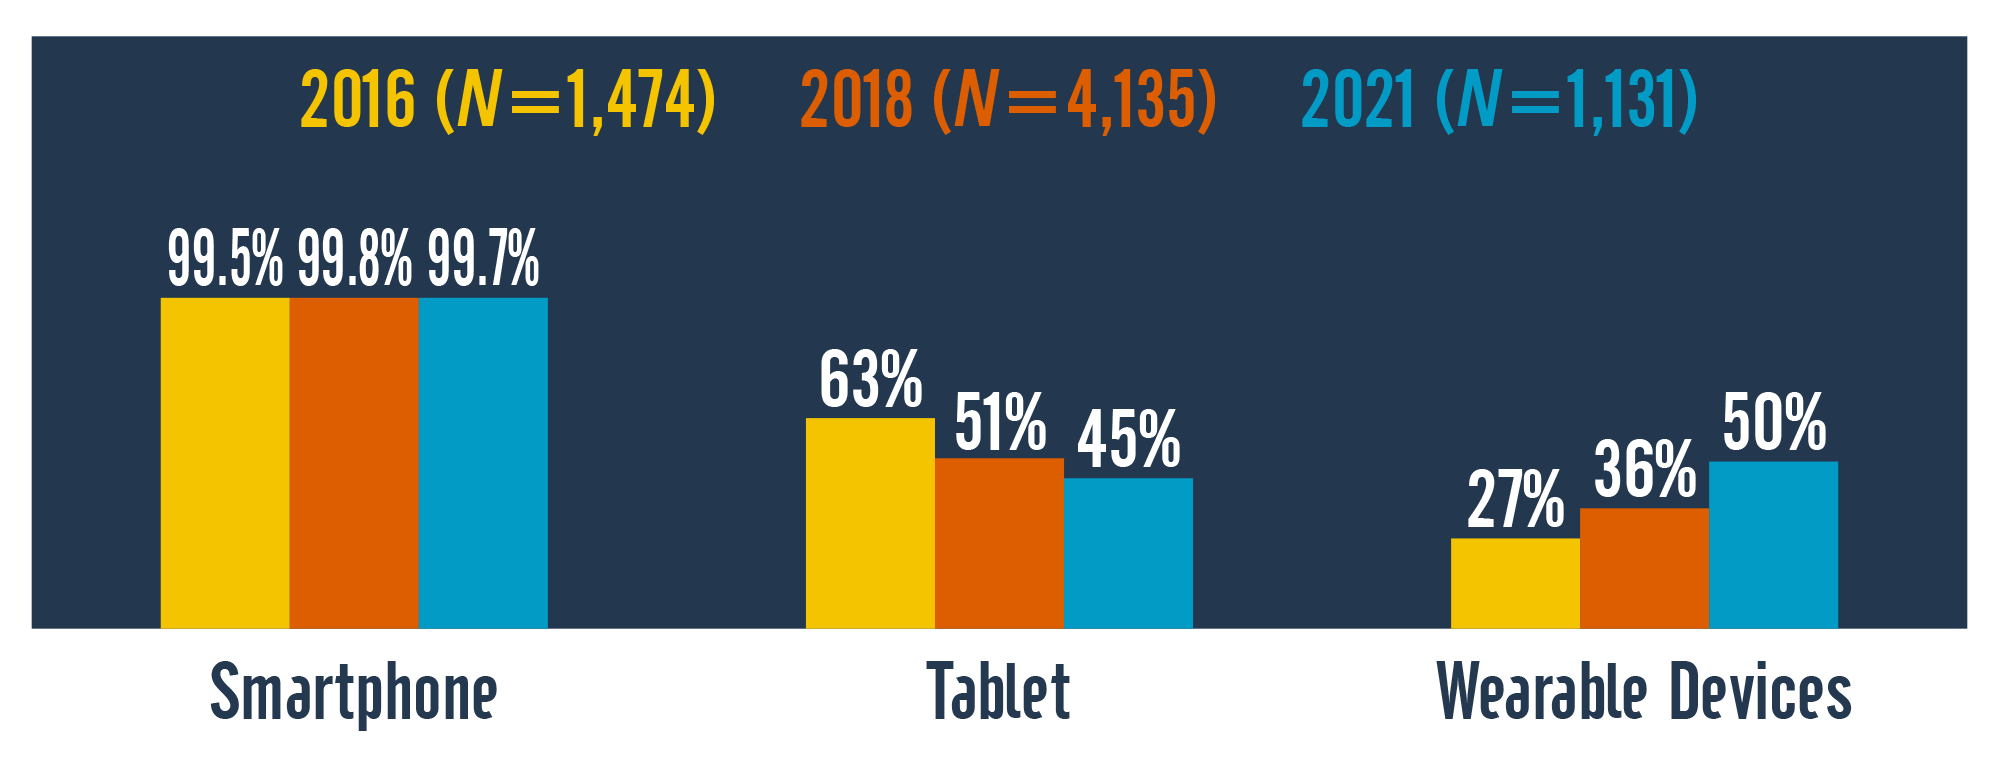 Column chart comparing student ownership of smartphones, tablets, and wearable devices across three survey years (2016, 2018, and 2021). Smartphone ownership in those three years was 99.5%, 99.8%, and 99.7%. Tablet ownership was 63%, 51%, and 45%. Wearable device ownership was 27%, 36%, and 50%.